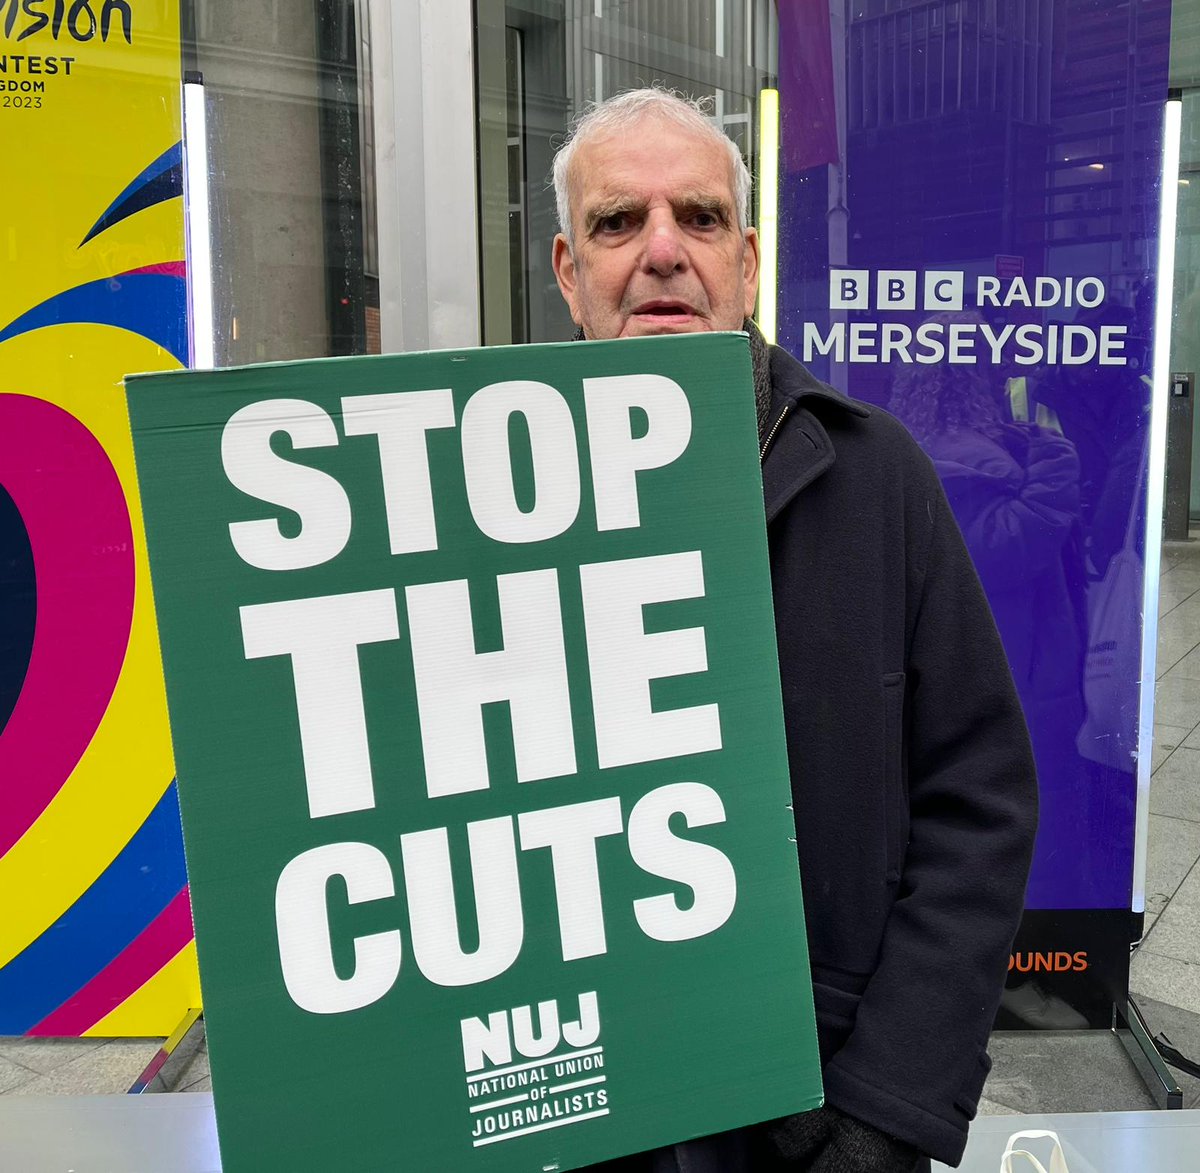 Loyal BBC Radio Merseyside listener Bernie is 83 years young and joined the picket today to show support for a station he has been listening to since it went on air. ✊ #KeepBBCLocalRadioLocal #NUJBBCStrike